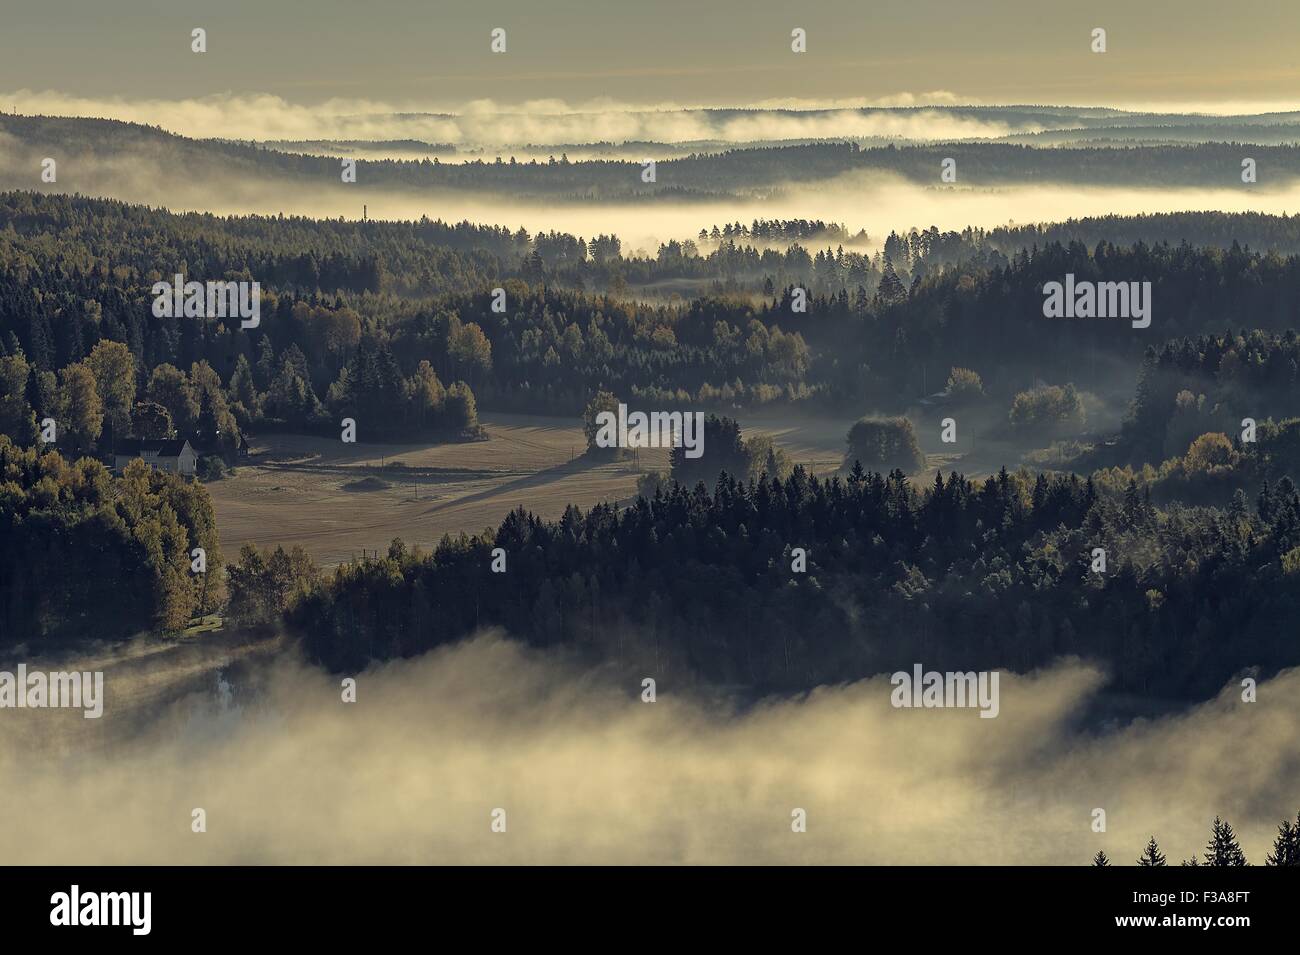 Beautiful landscape of Aulanko nature reserve park in Finland. Thick fog covering the scene in the early morning. HDR image. Stock Photo